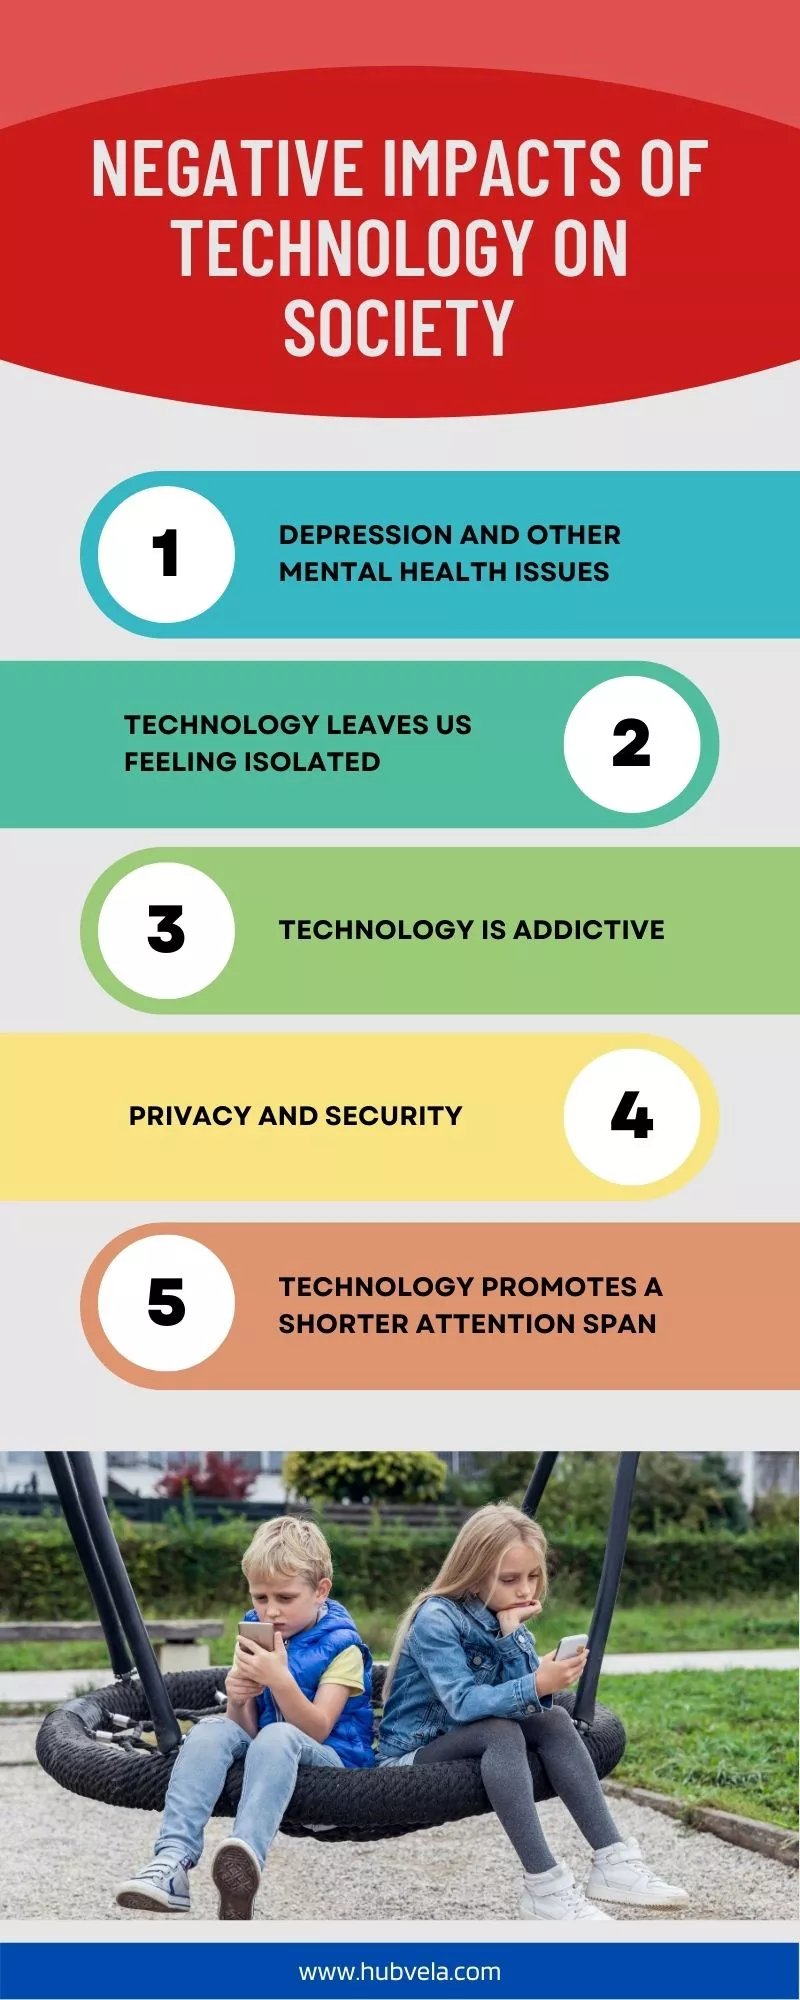 Negative Impacts of Technology on Society infographic